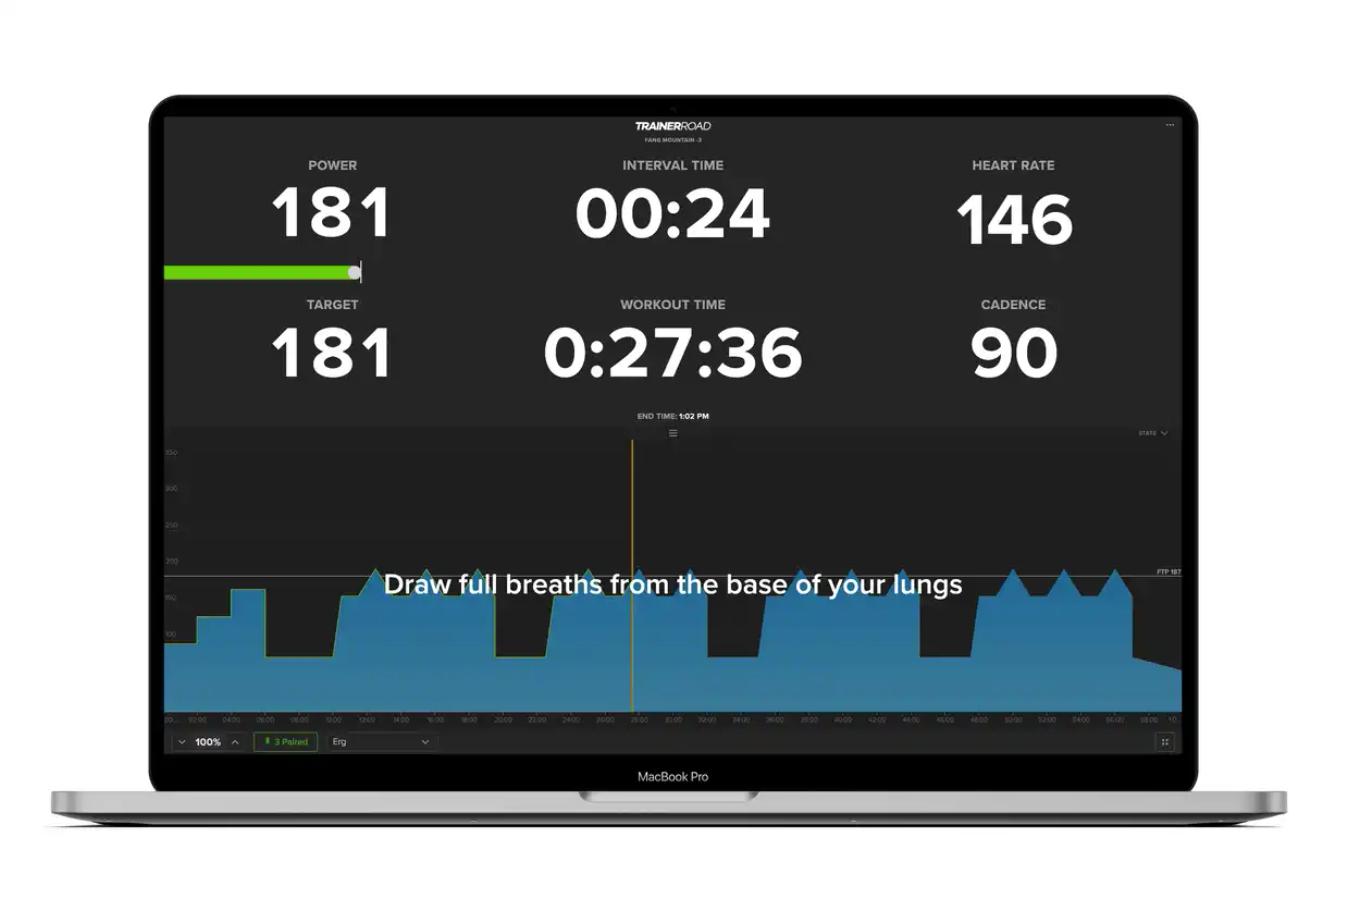 Trainer road offers a different take on indoor training, using a graphical display to show progress